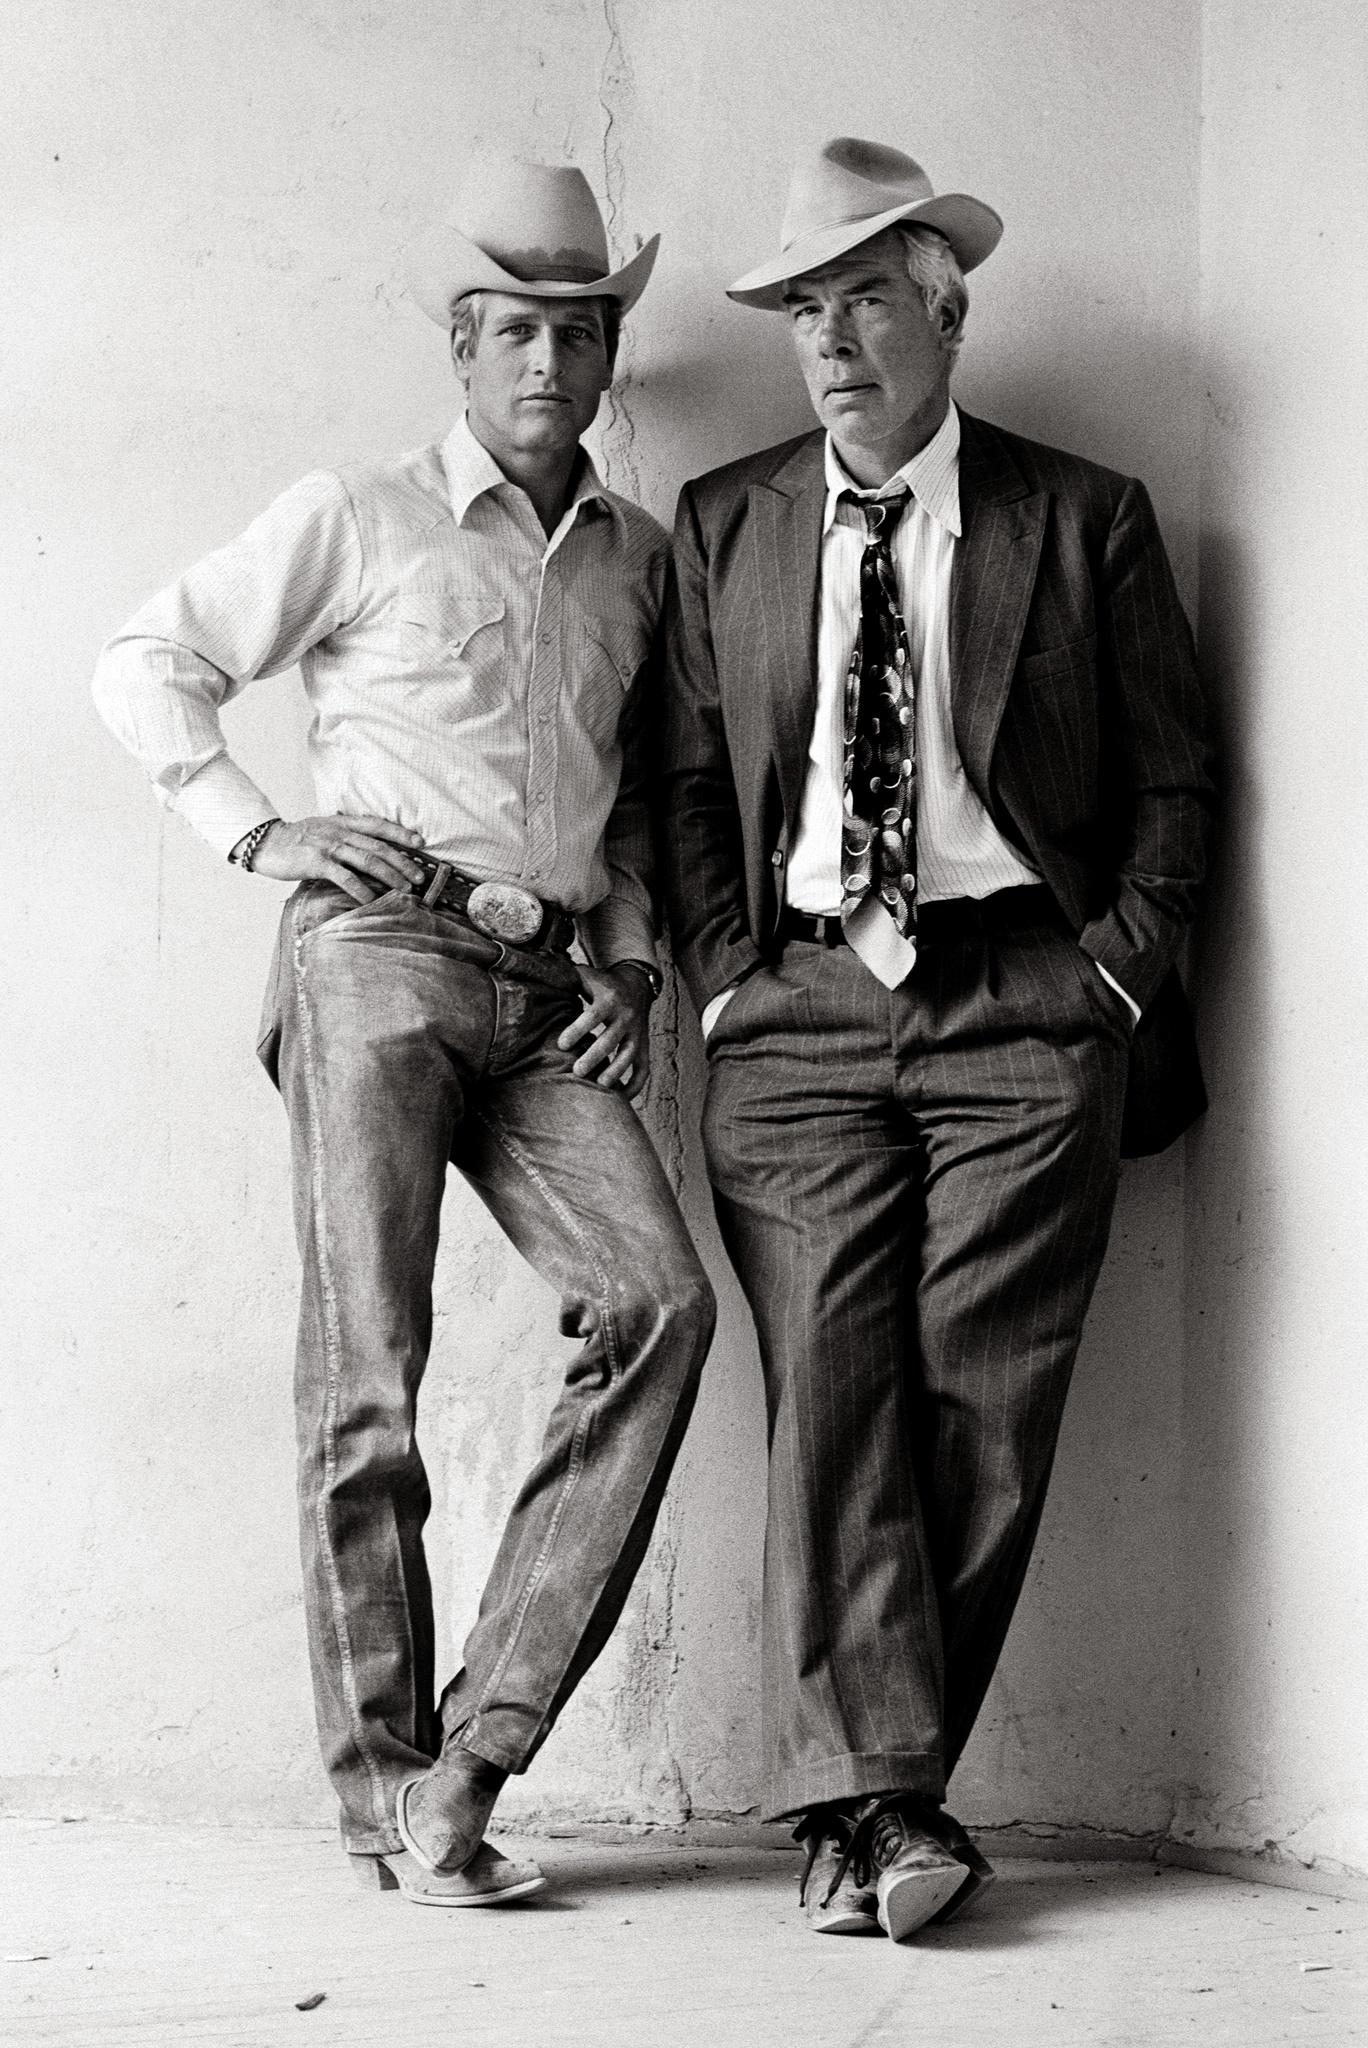 Terry O'Neill (Portrait Photography) - Paul Newman and Lee Marvin, 1972